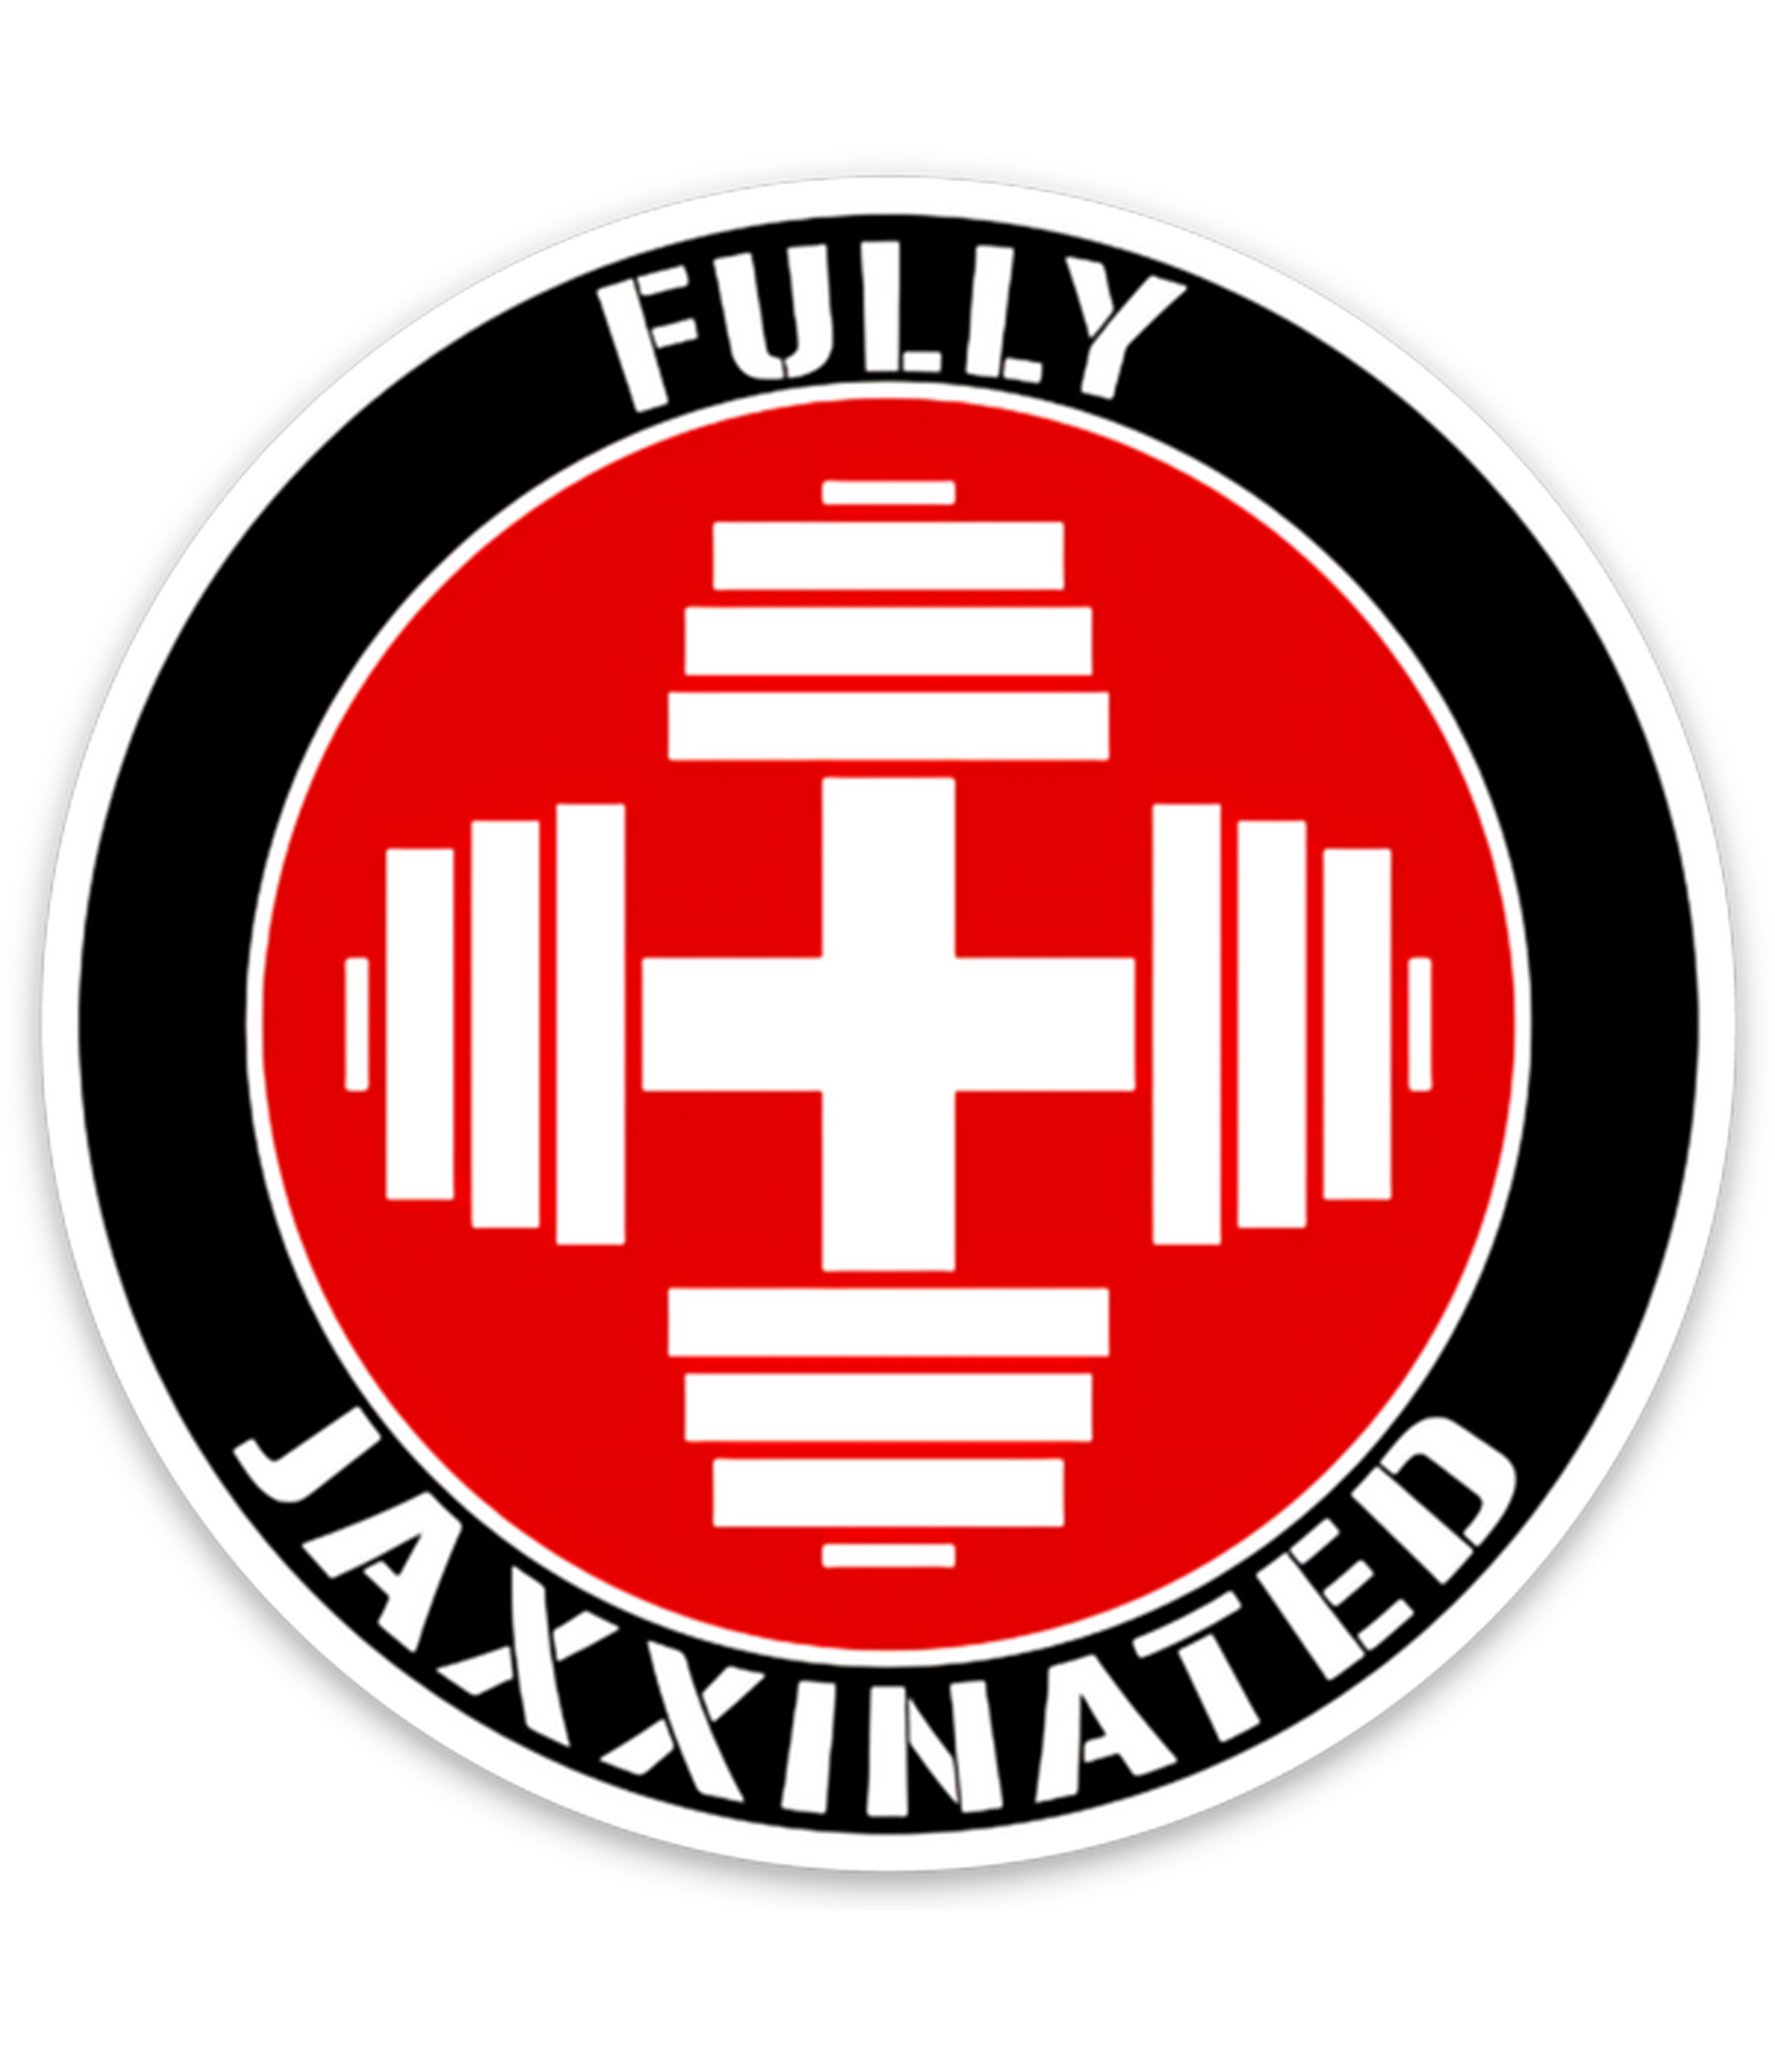 Fully Jaxxinated Decal